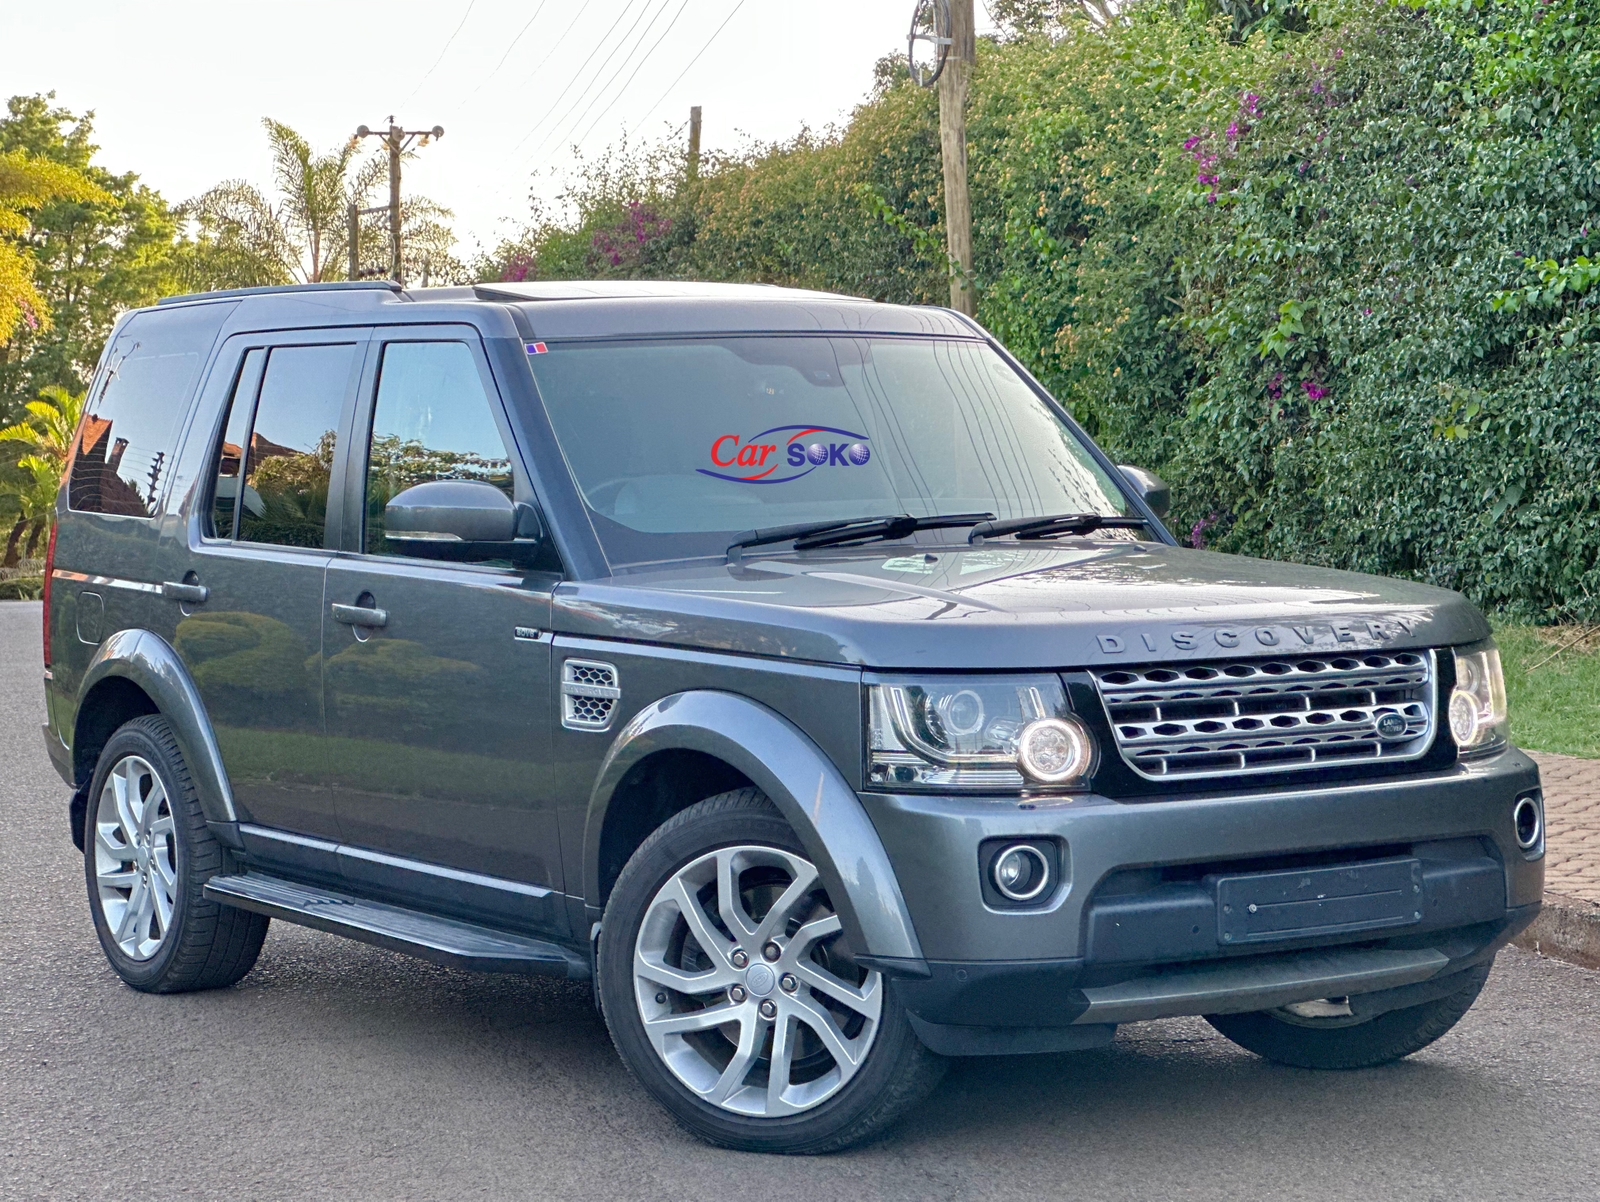 2015-land-rover-Discovery IV-1149